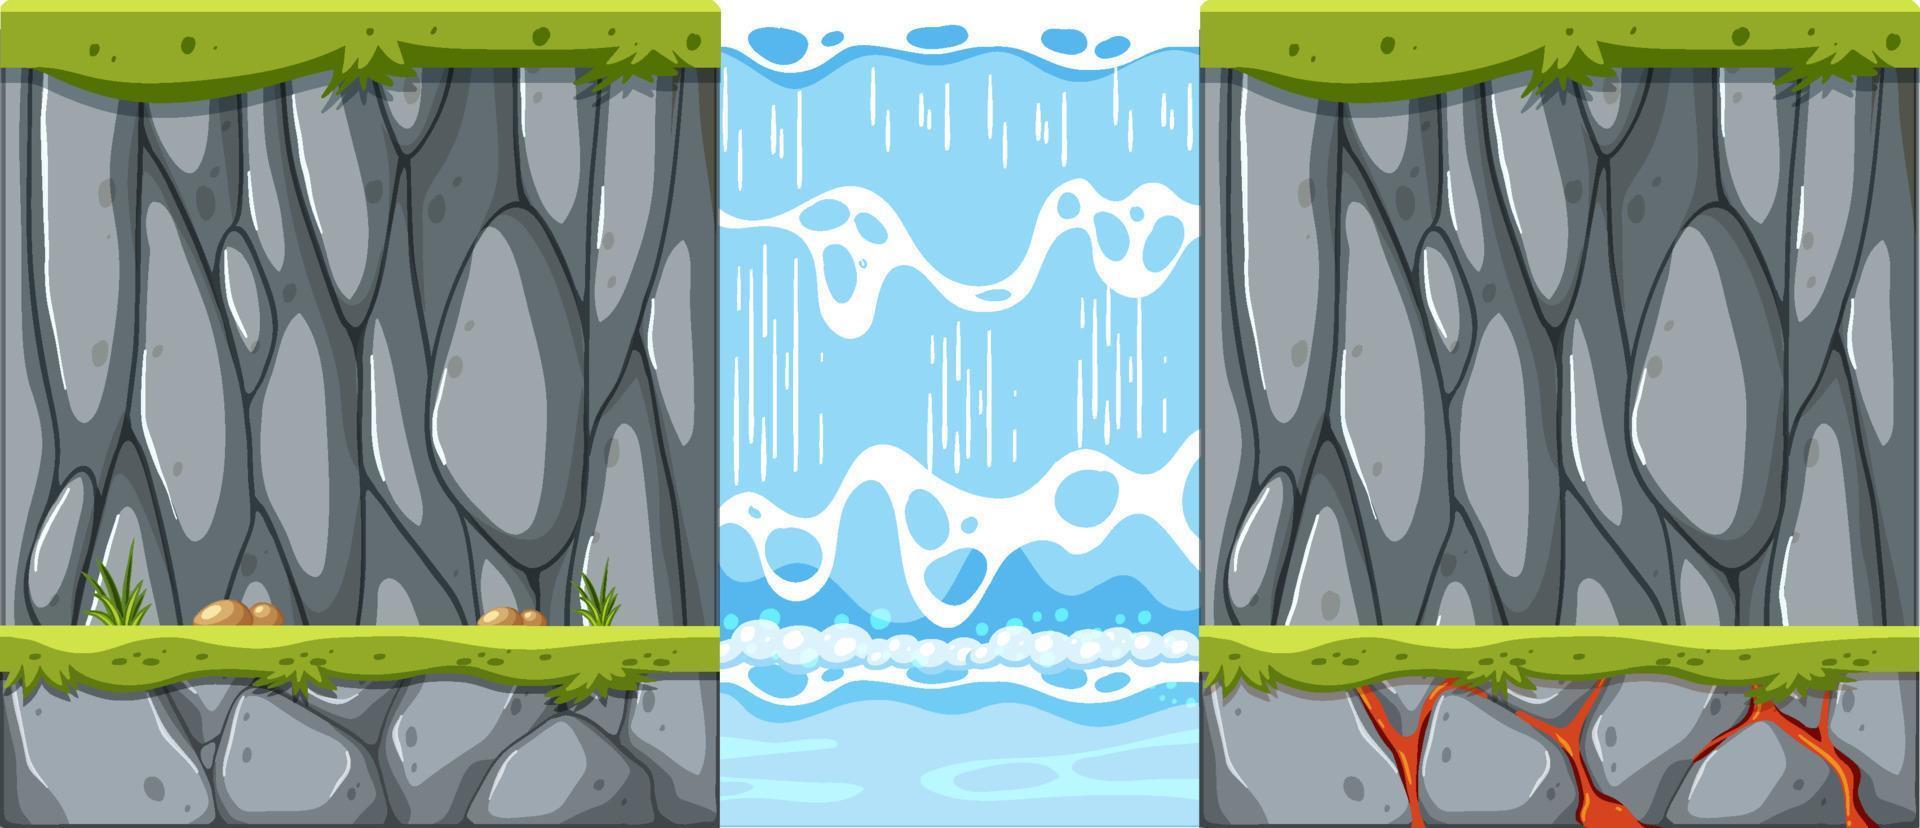 Waterfall in nature on white background vector